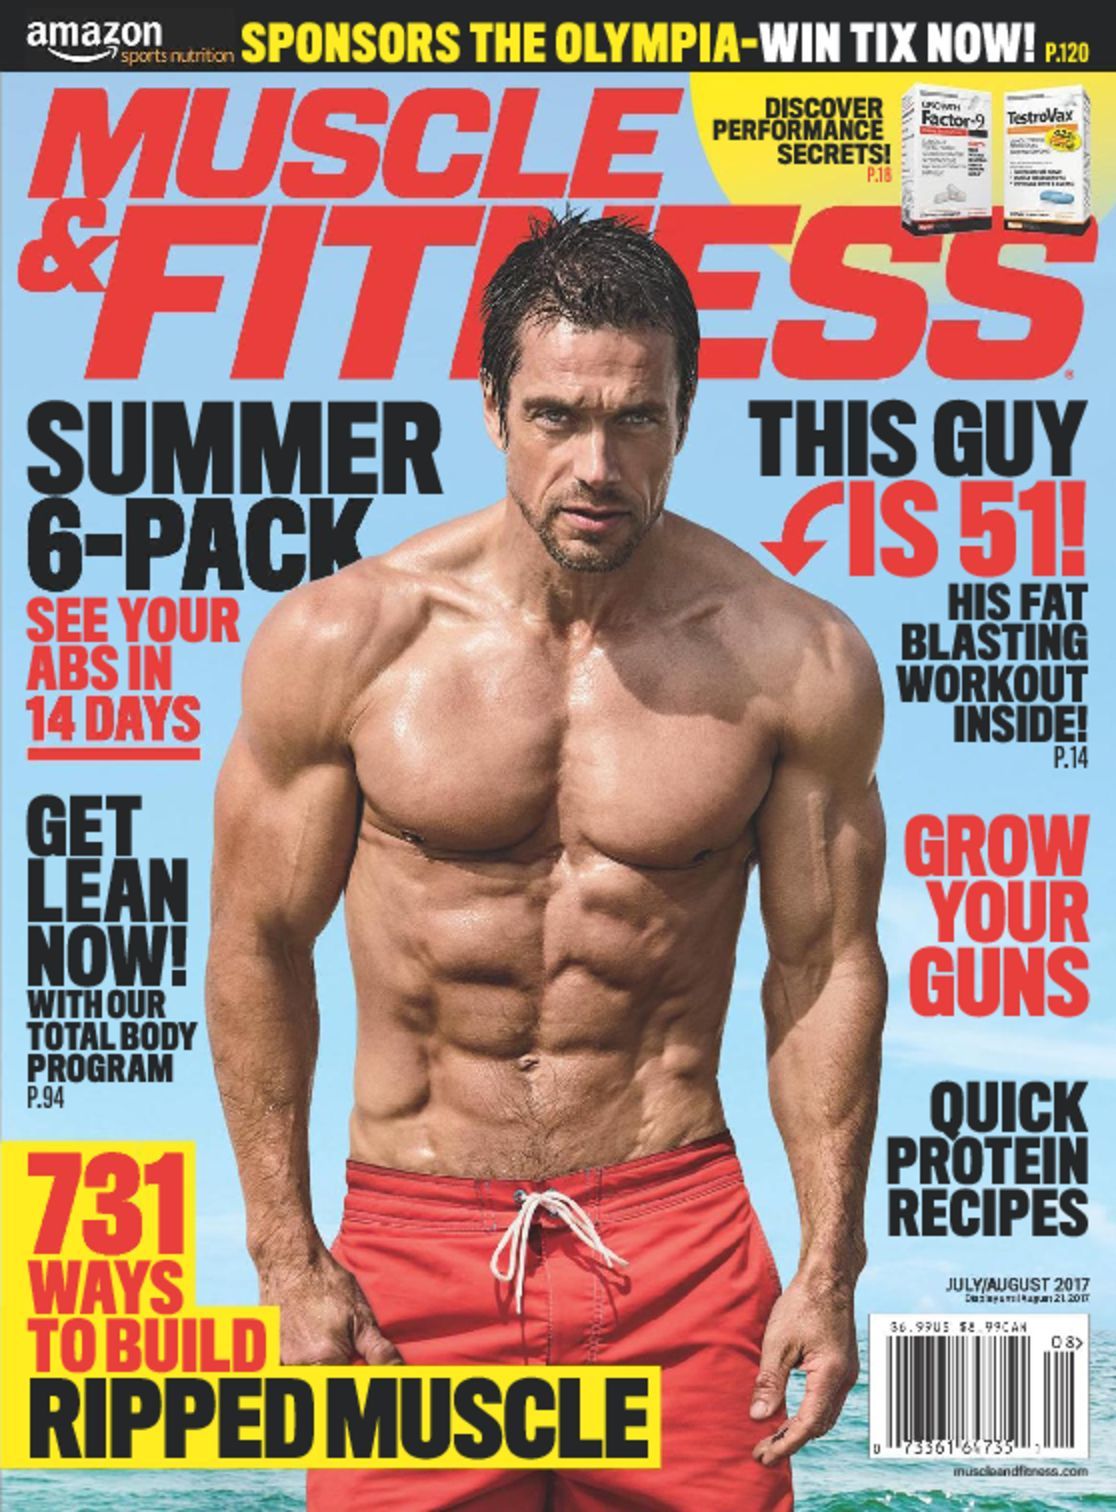 5015-muscle-fitness-Cover-2017-July-1-Issue.jpg